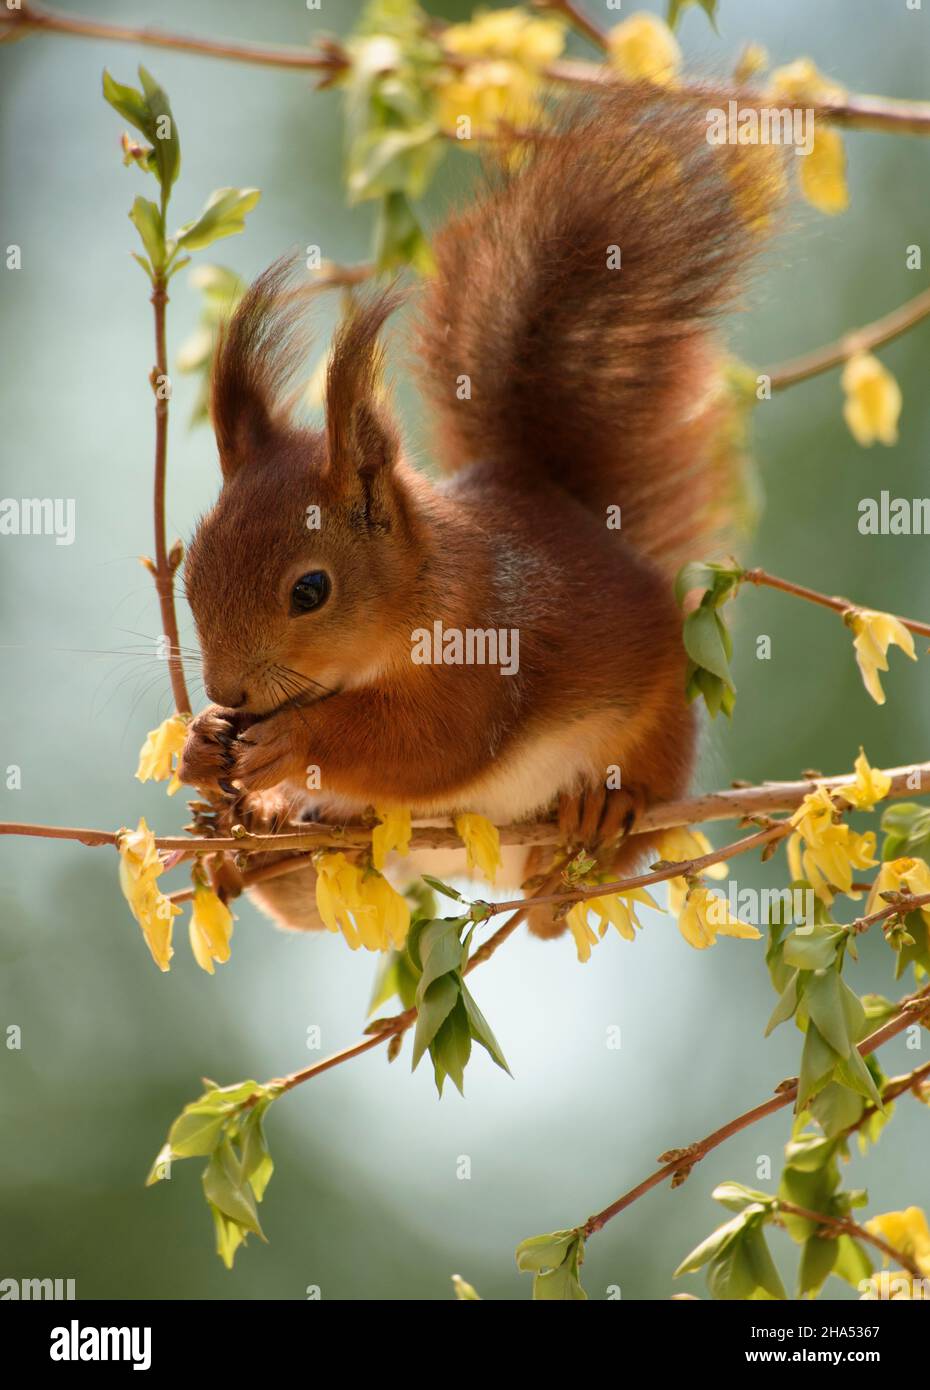 red squirrel is standing on a forsythia branch looking down Stock Photo